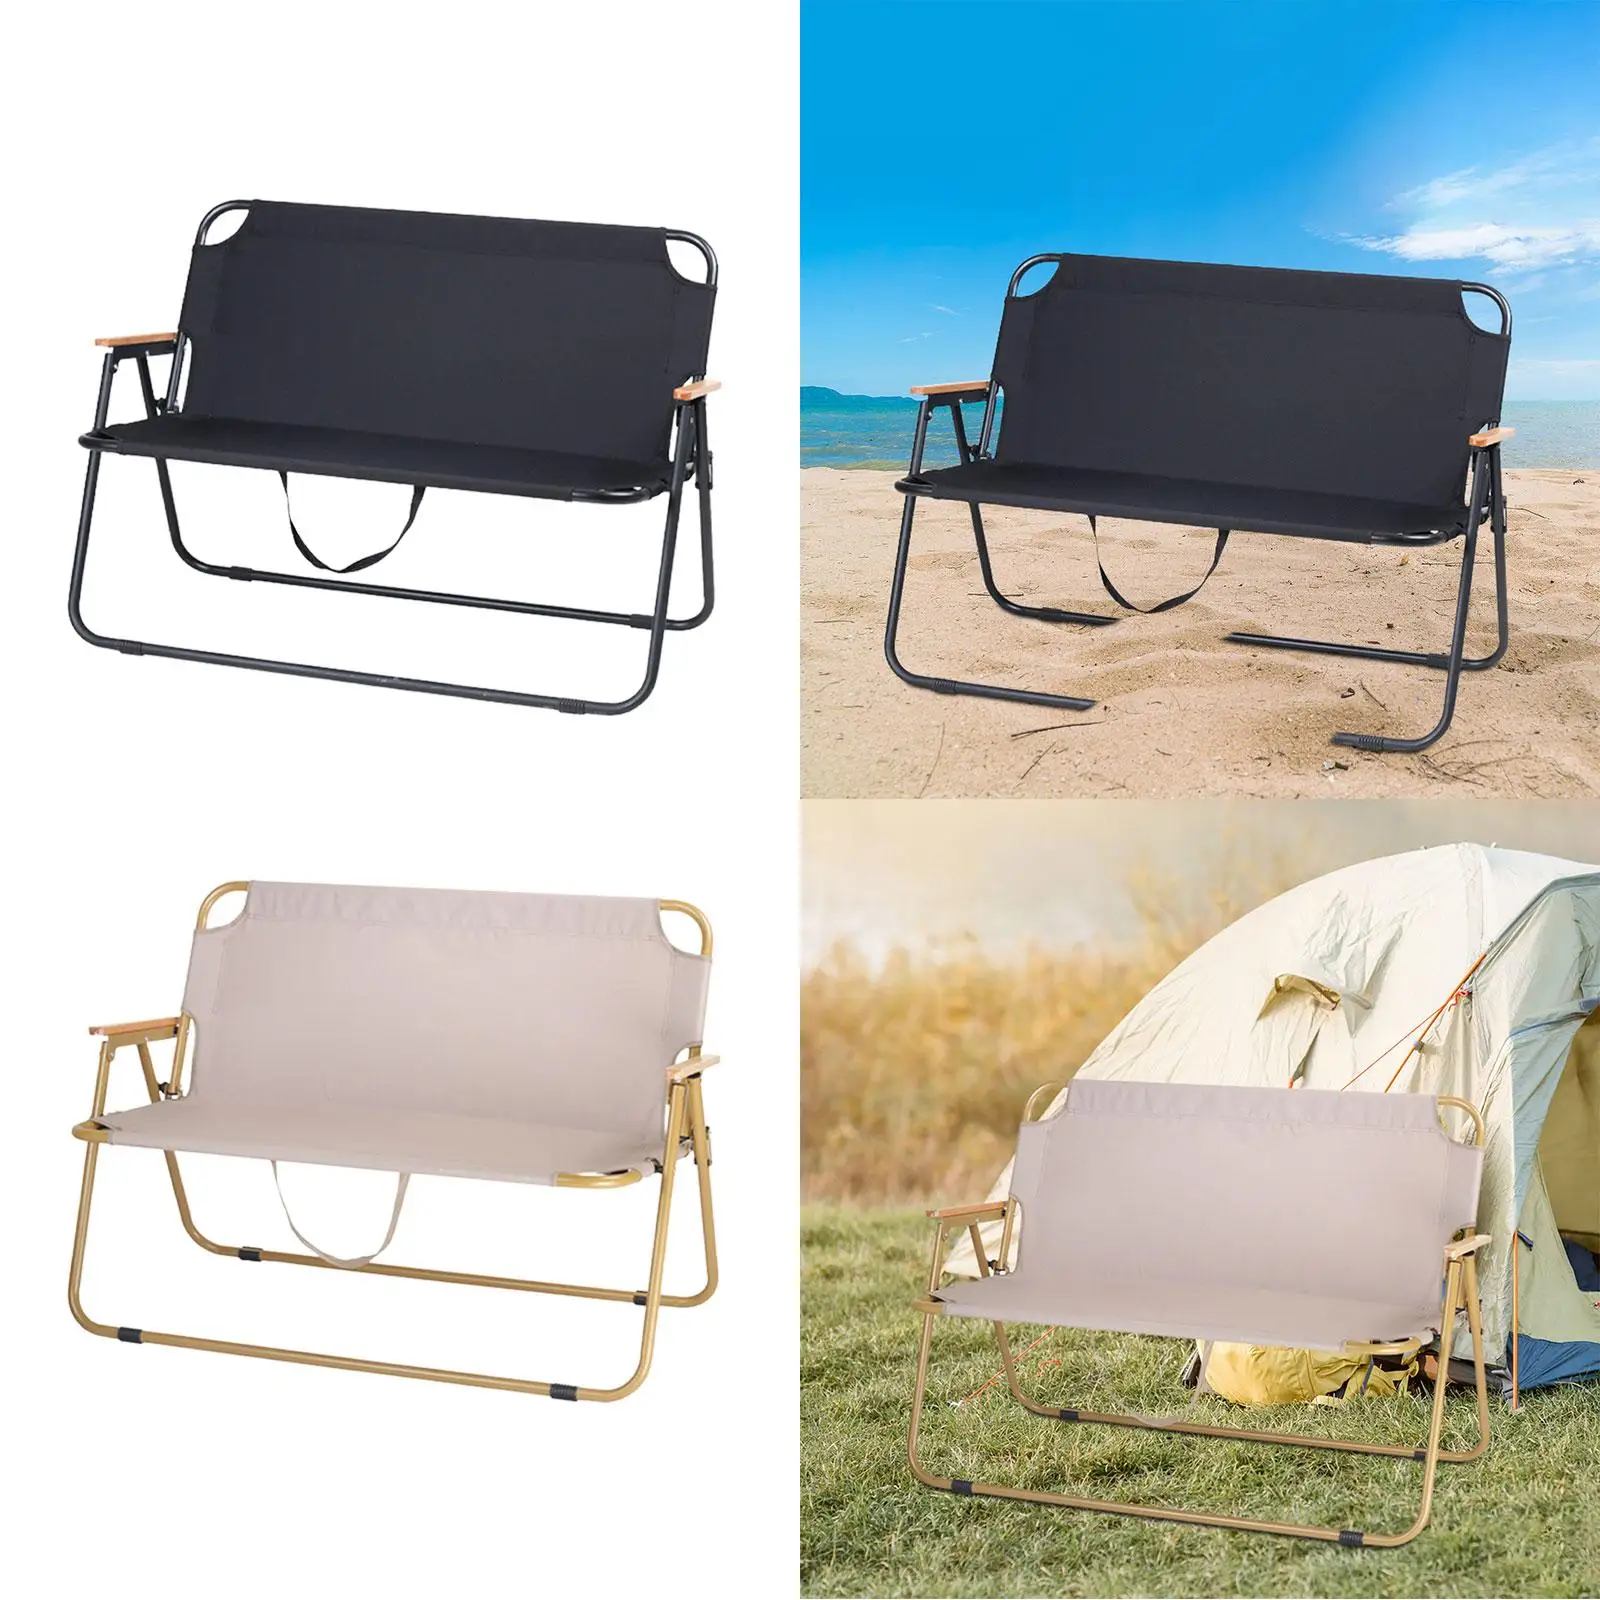 Folding Camping Chair Lightweight Double Chair Adult Outdoor Fishing Backpacking Patio Travel Hiking Camping Seat Camp Chair